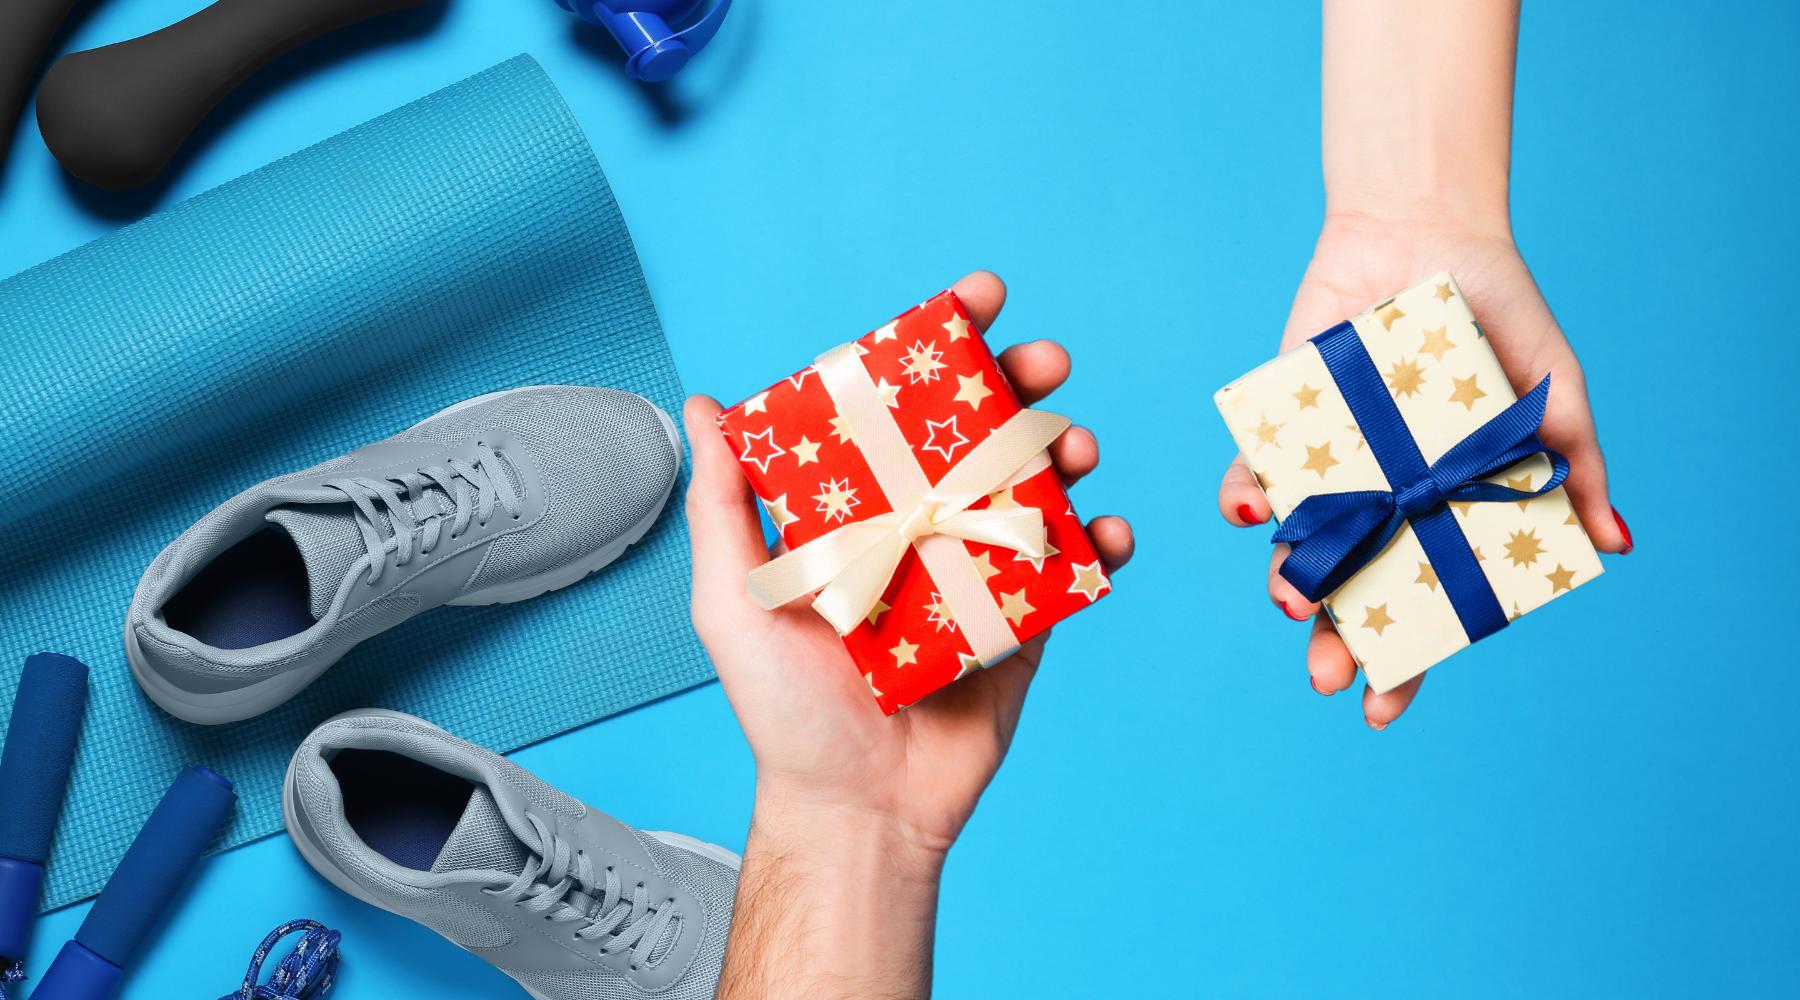 Fitness equipment. Man's hand holding out a gift. Woman's hand holding out a gift